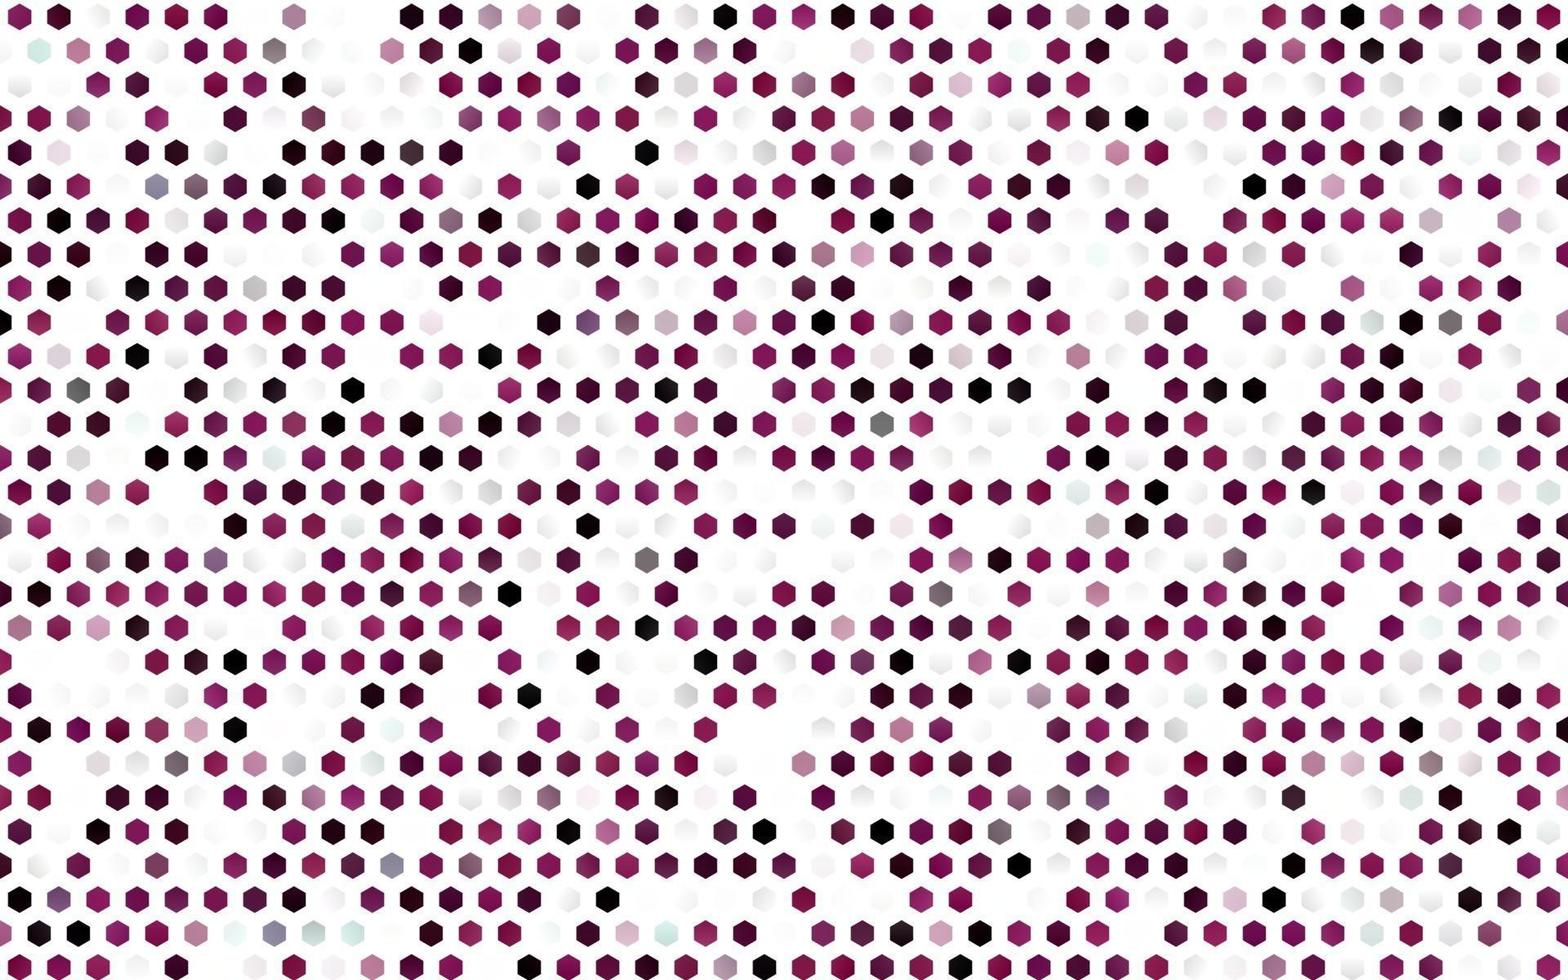 Dark Pink vector layout with hexagonal shapes.